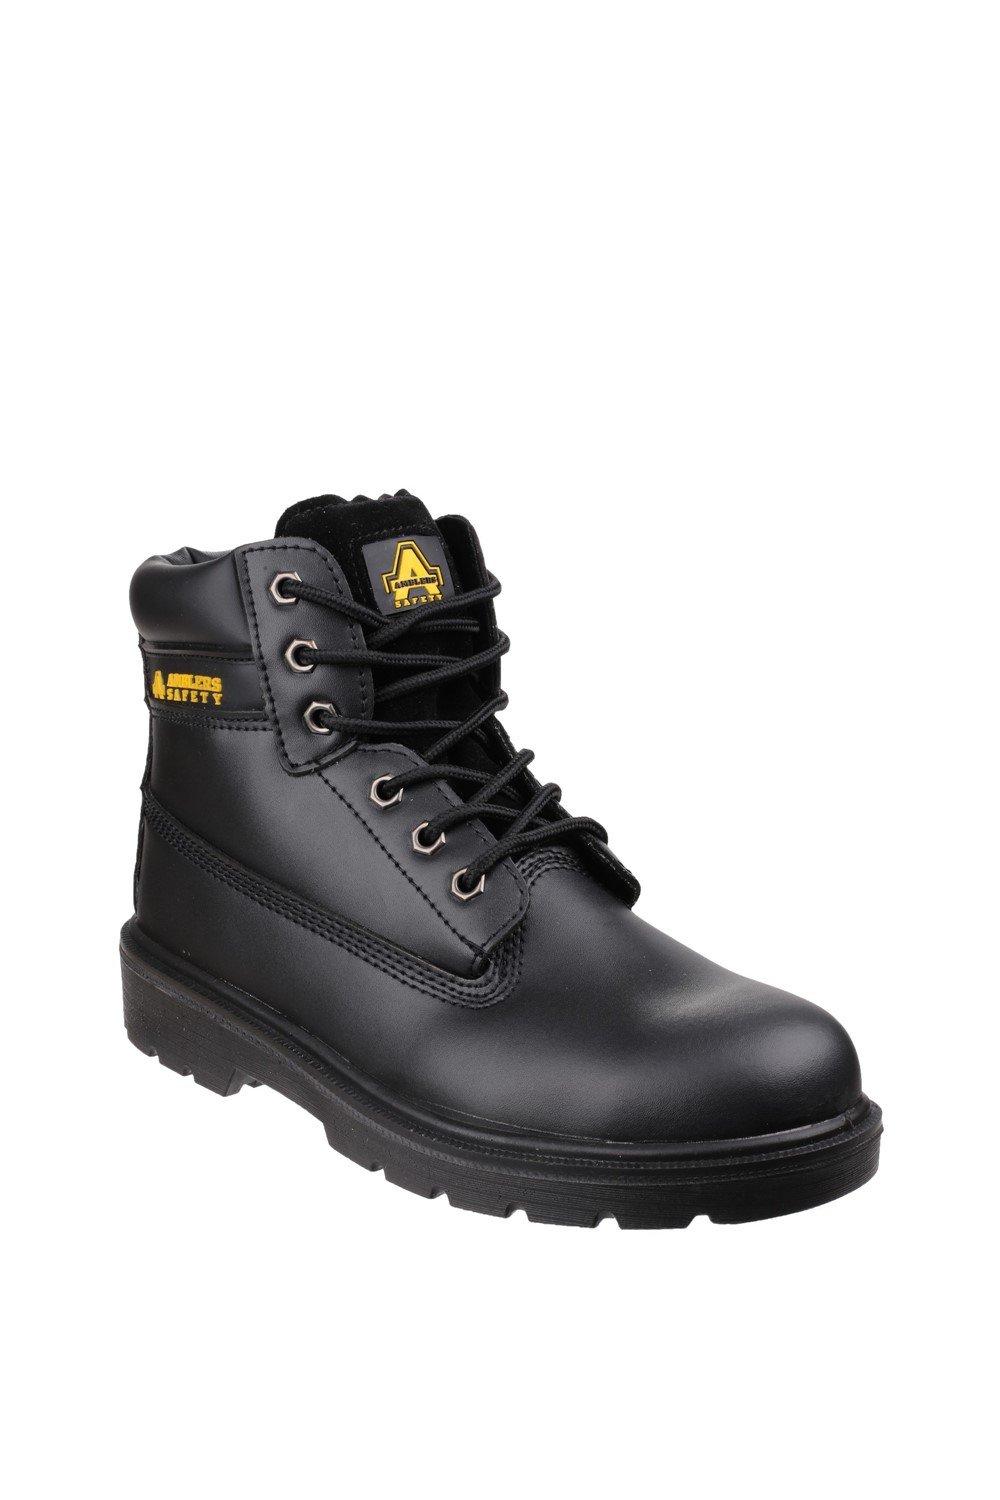 'FS112' Safety Boots